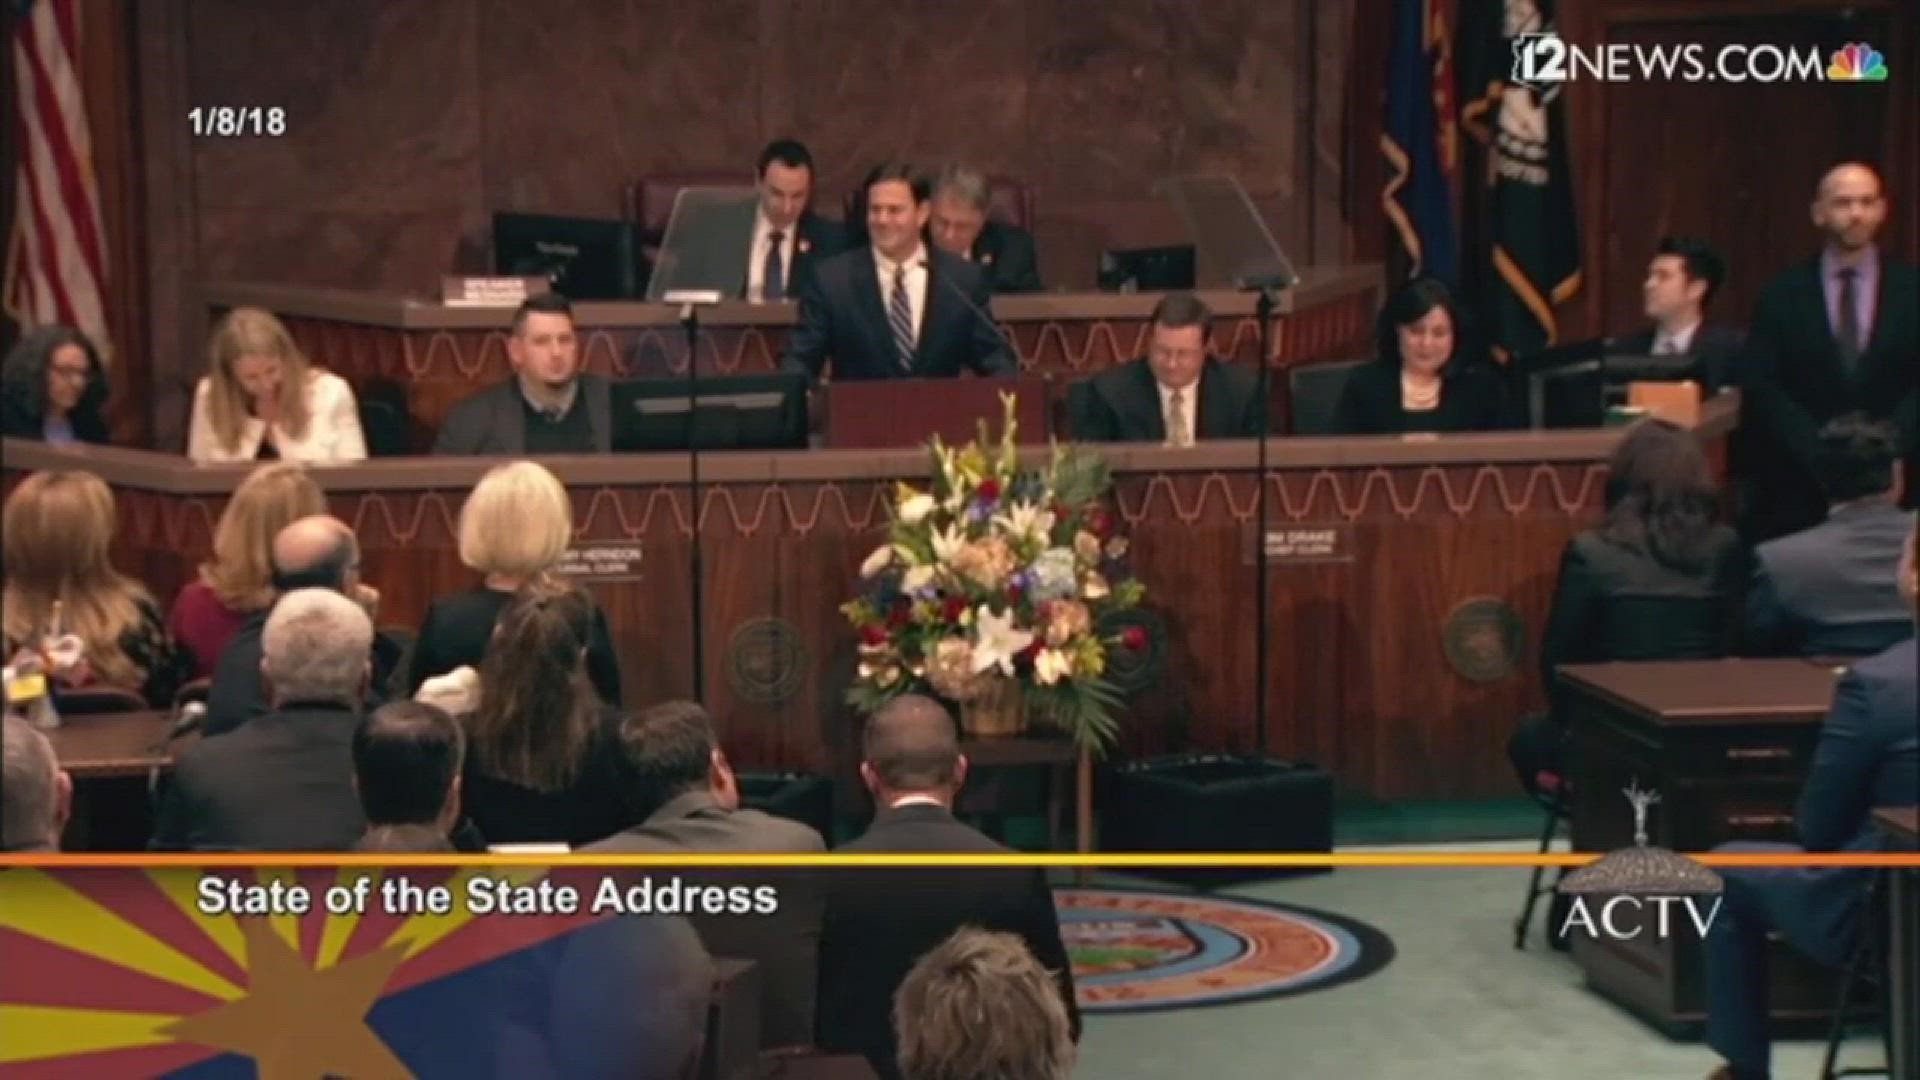 Gov. Ducey's delivered the "State of the State" address at the capitol in Phoenix.